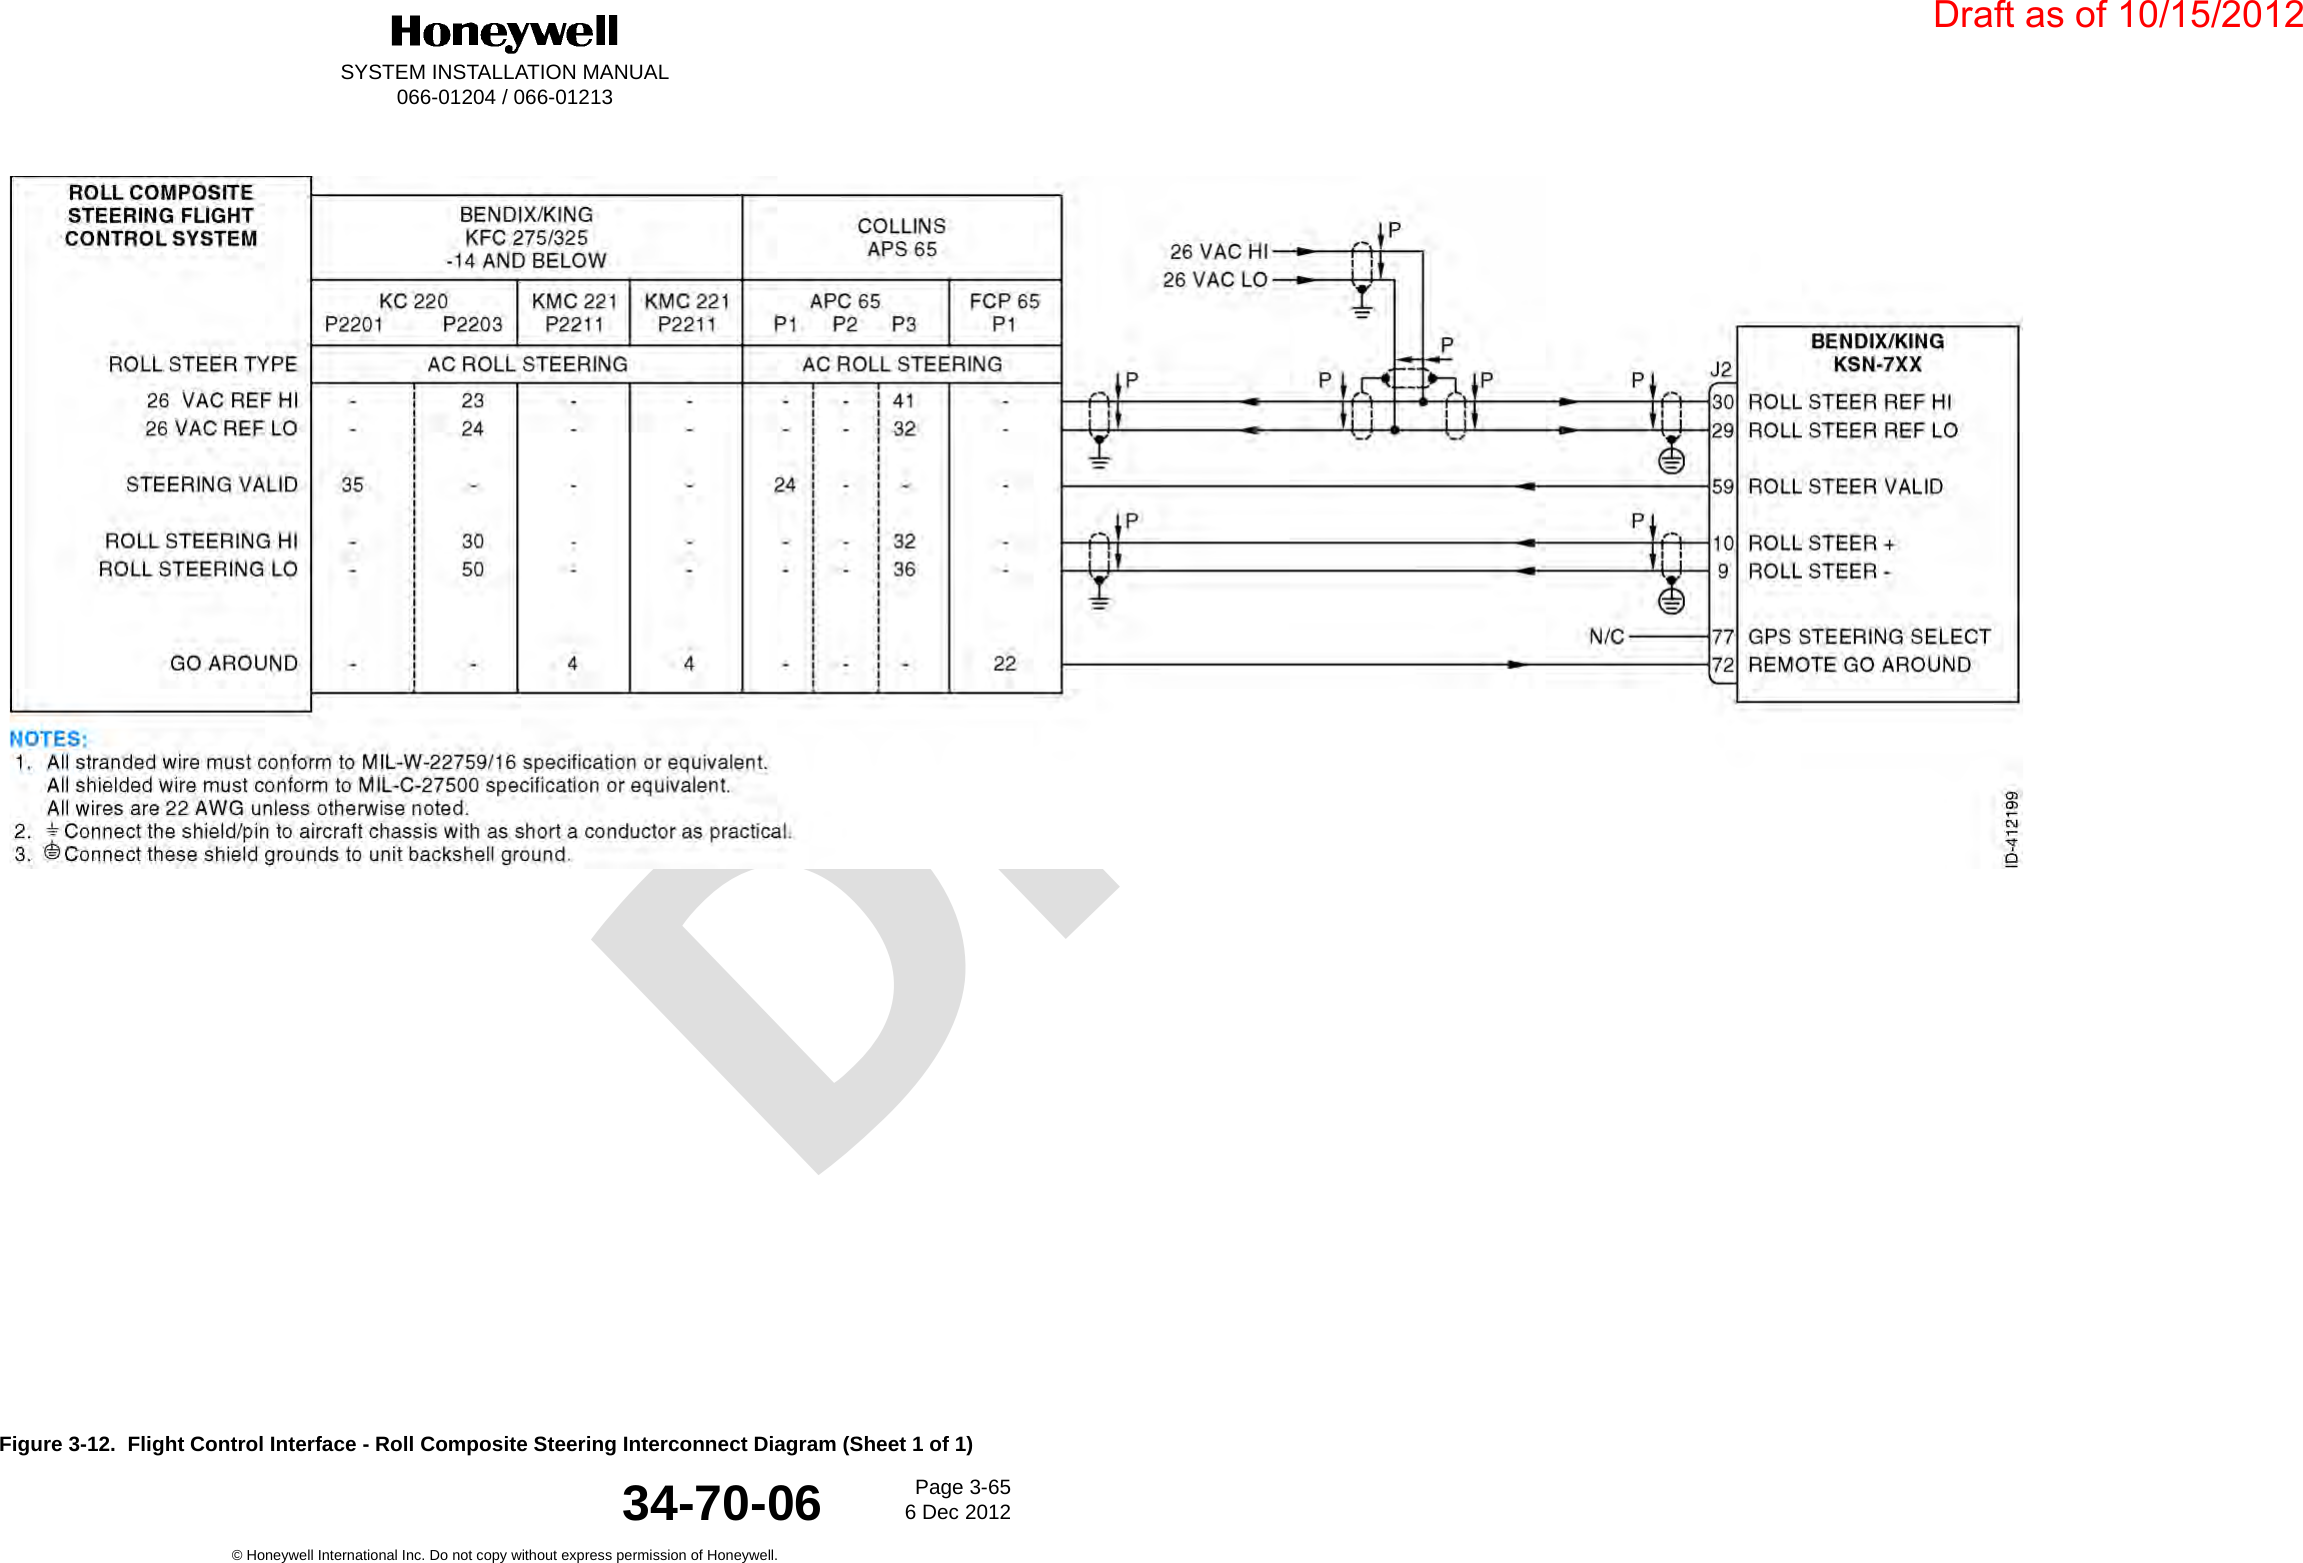 DraftSYSTEM INSTALLATION MANUAL066-01204 / 066-01213Page 3-656 Dec 2012© Honeywell International Inc. Do not copy without express permission of Honeywell.34-70-06Figure 3-12.  Flight Control Interface - Roll Composite Steering Interconnect Diagram (Sheet 1 of 1)Draft as of 10/15/2012